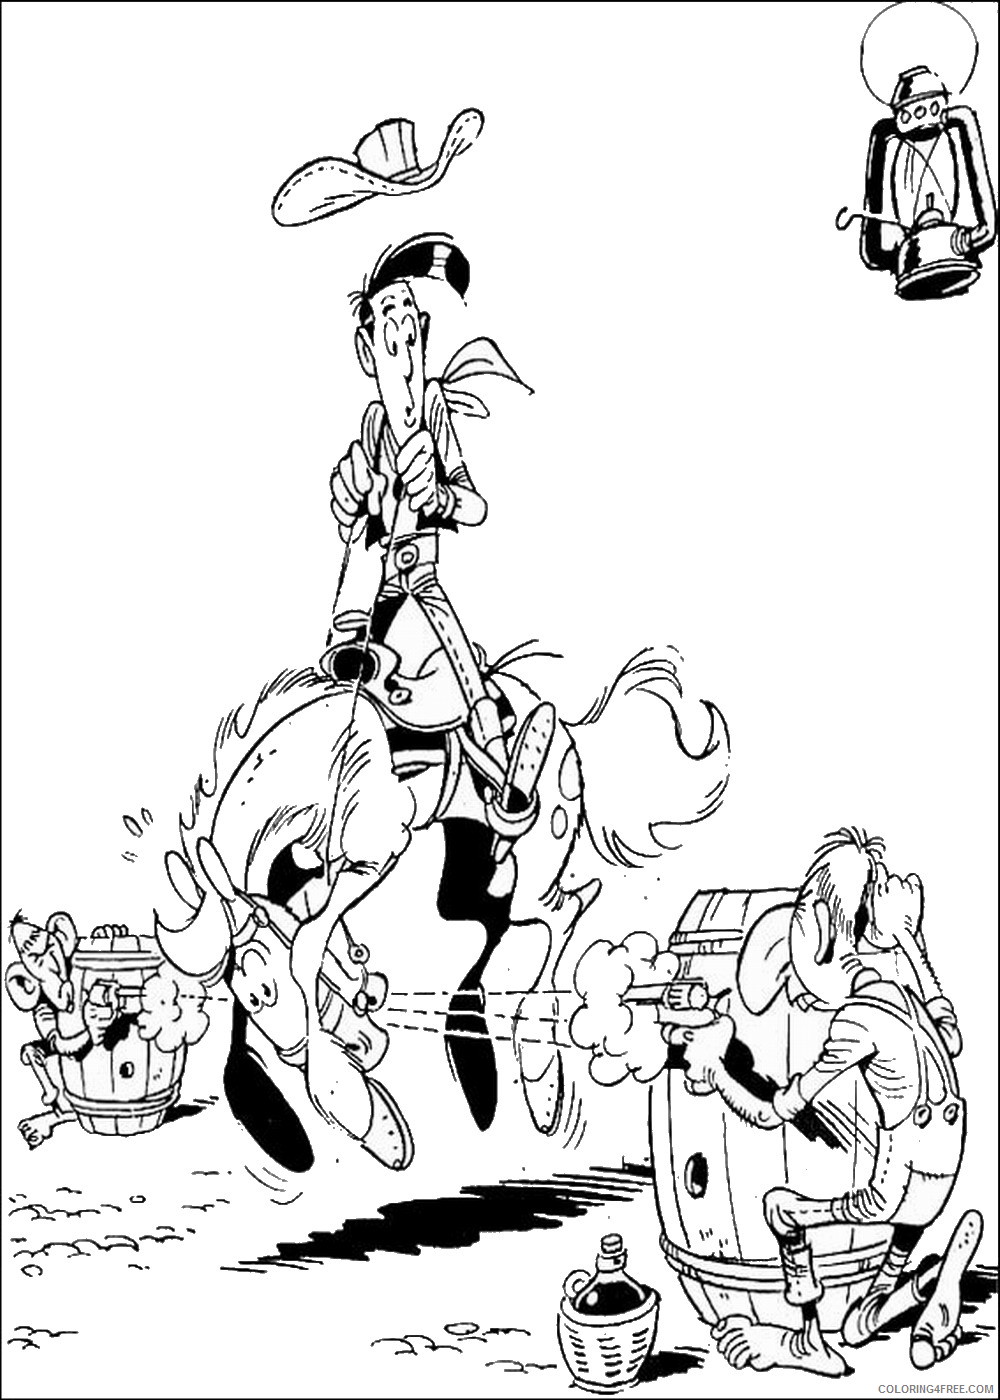 Lucky Luke Coloring Pages Cartoons lucky_luke_coloring_page_6 Printable 2020 3959 Coloring4free